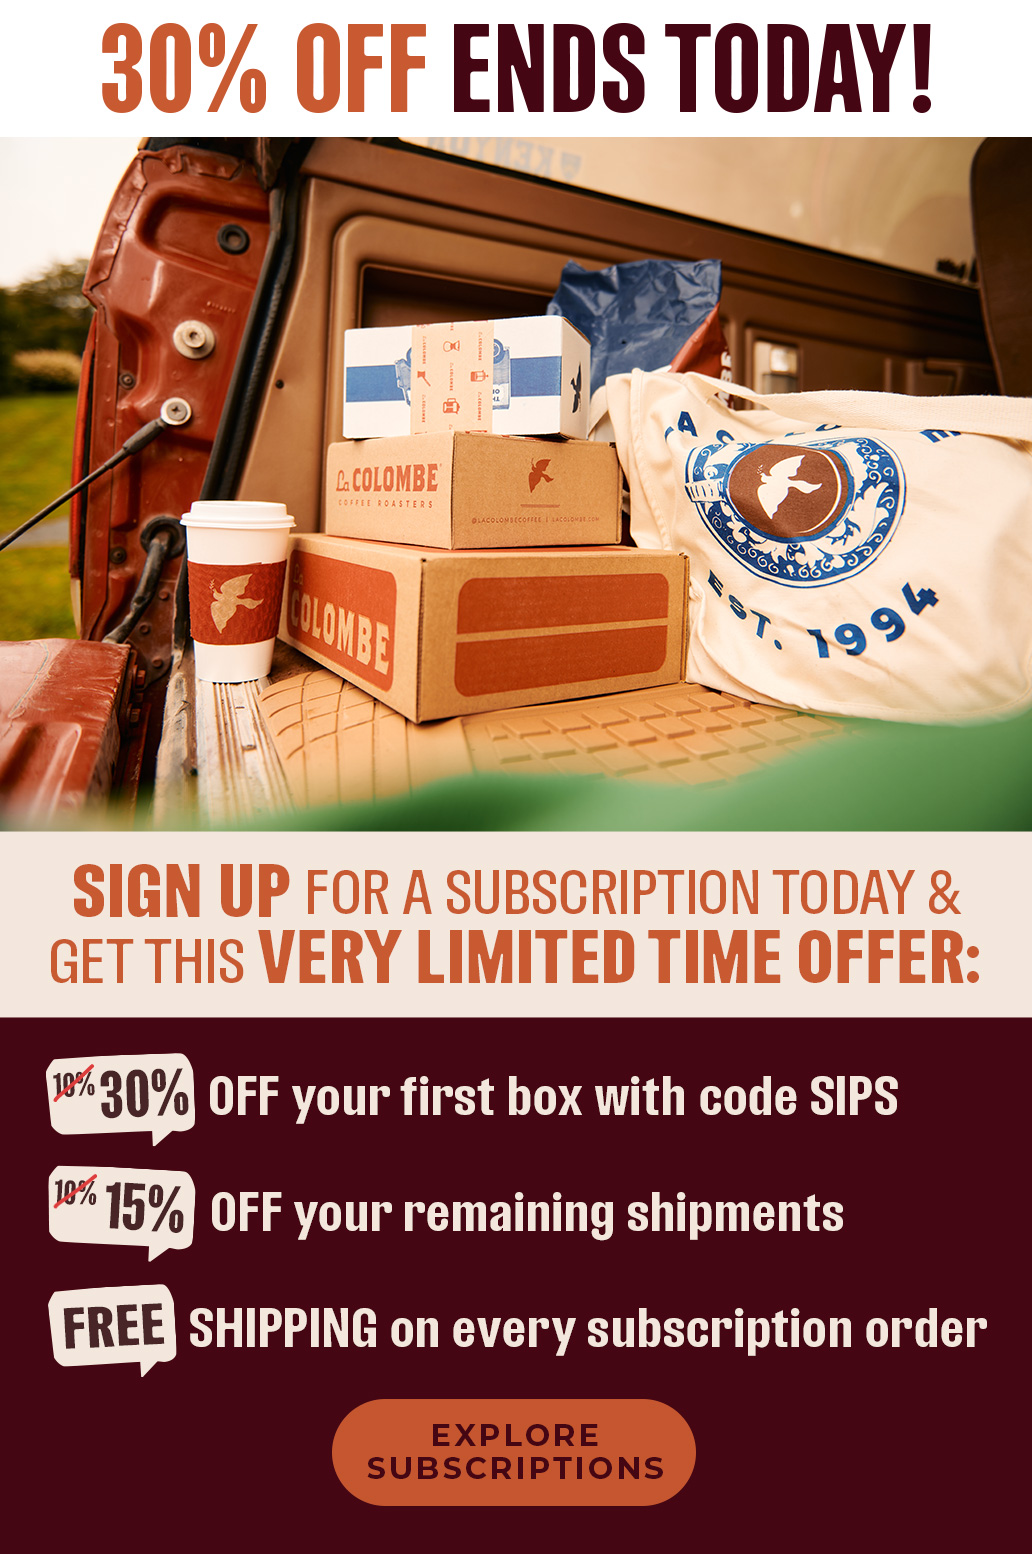 30% OFF ENDS TODAY! SIGN UP FOR A SUBSCRIPTION TODAY GET THIS VERY LIMITED TIME OFFER: L VA OFF your first hox with code SIPS G572 OFF your remaining shipments m SHIPPING on every subscription order 